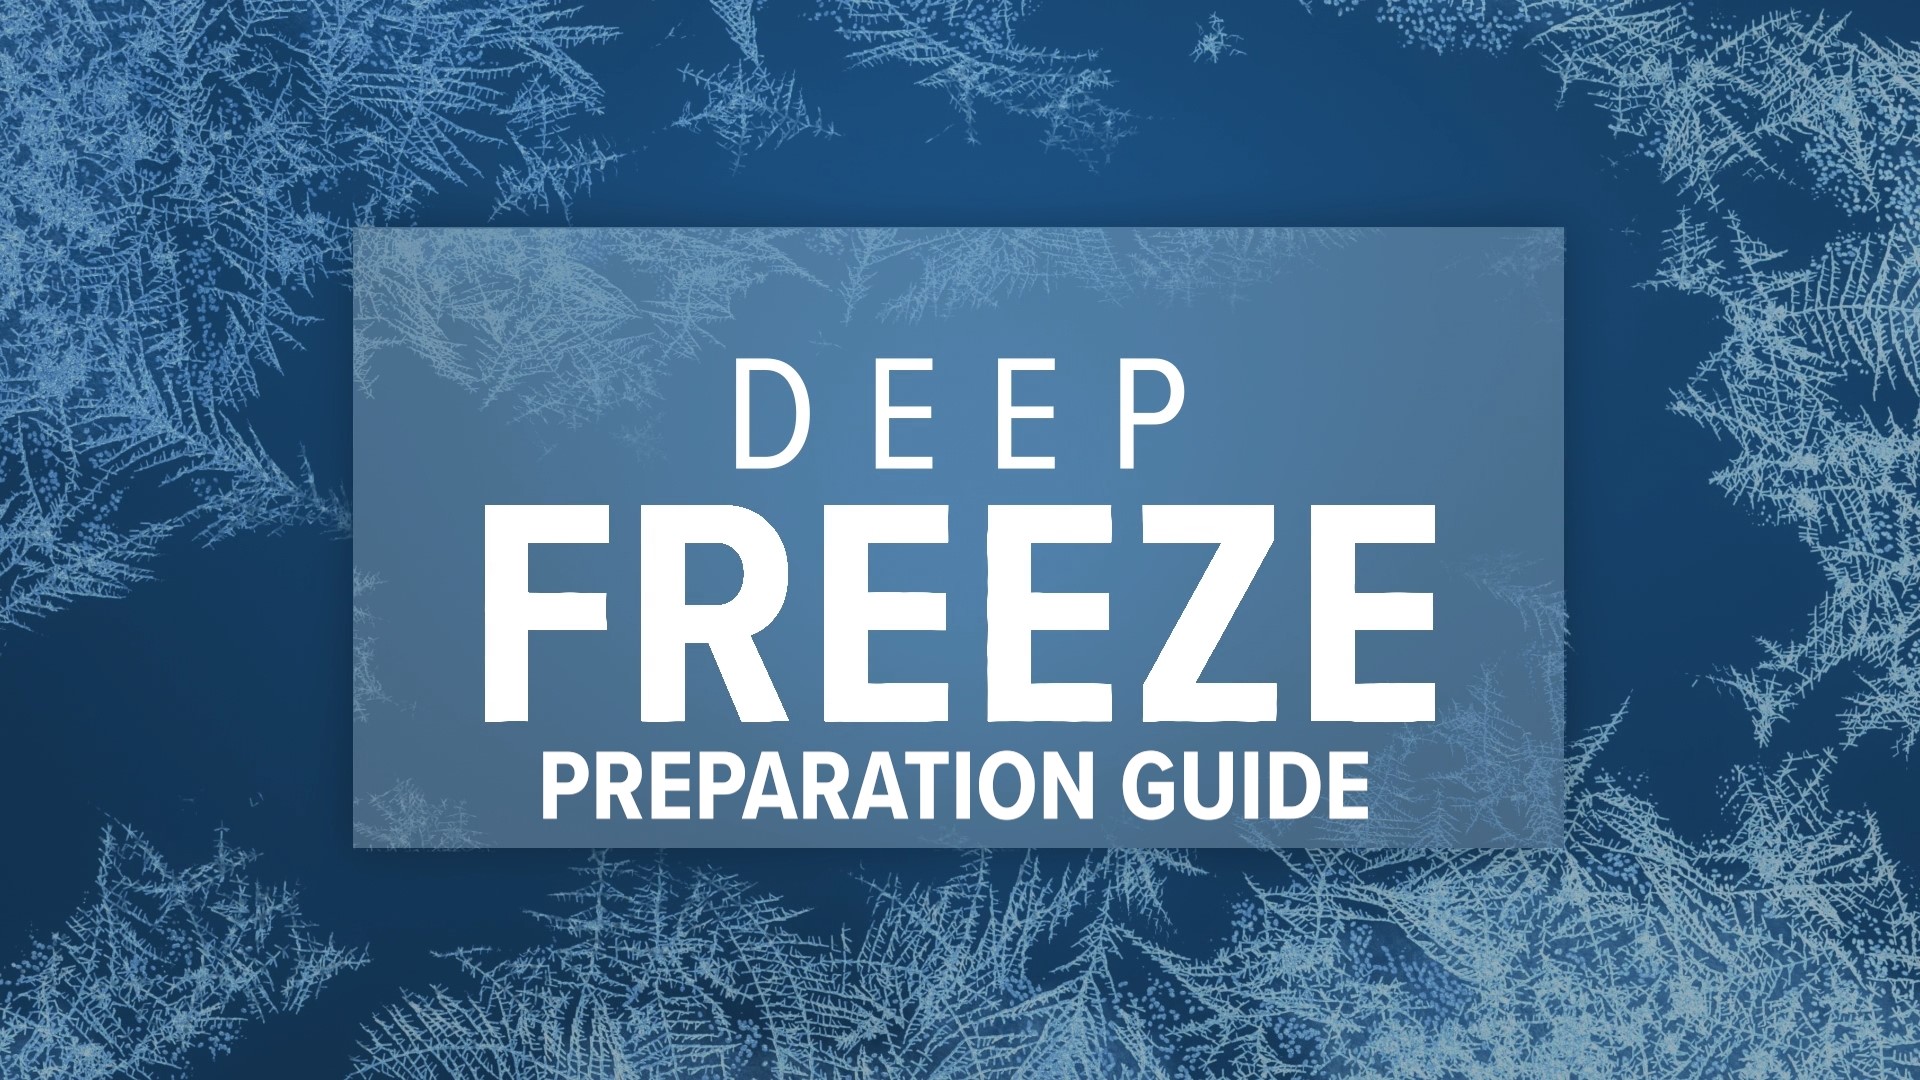 From winterizing your home and car to knowing the signs of hypothermia and frostbite, here is a primer on being ready for deep freeze conditions.